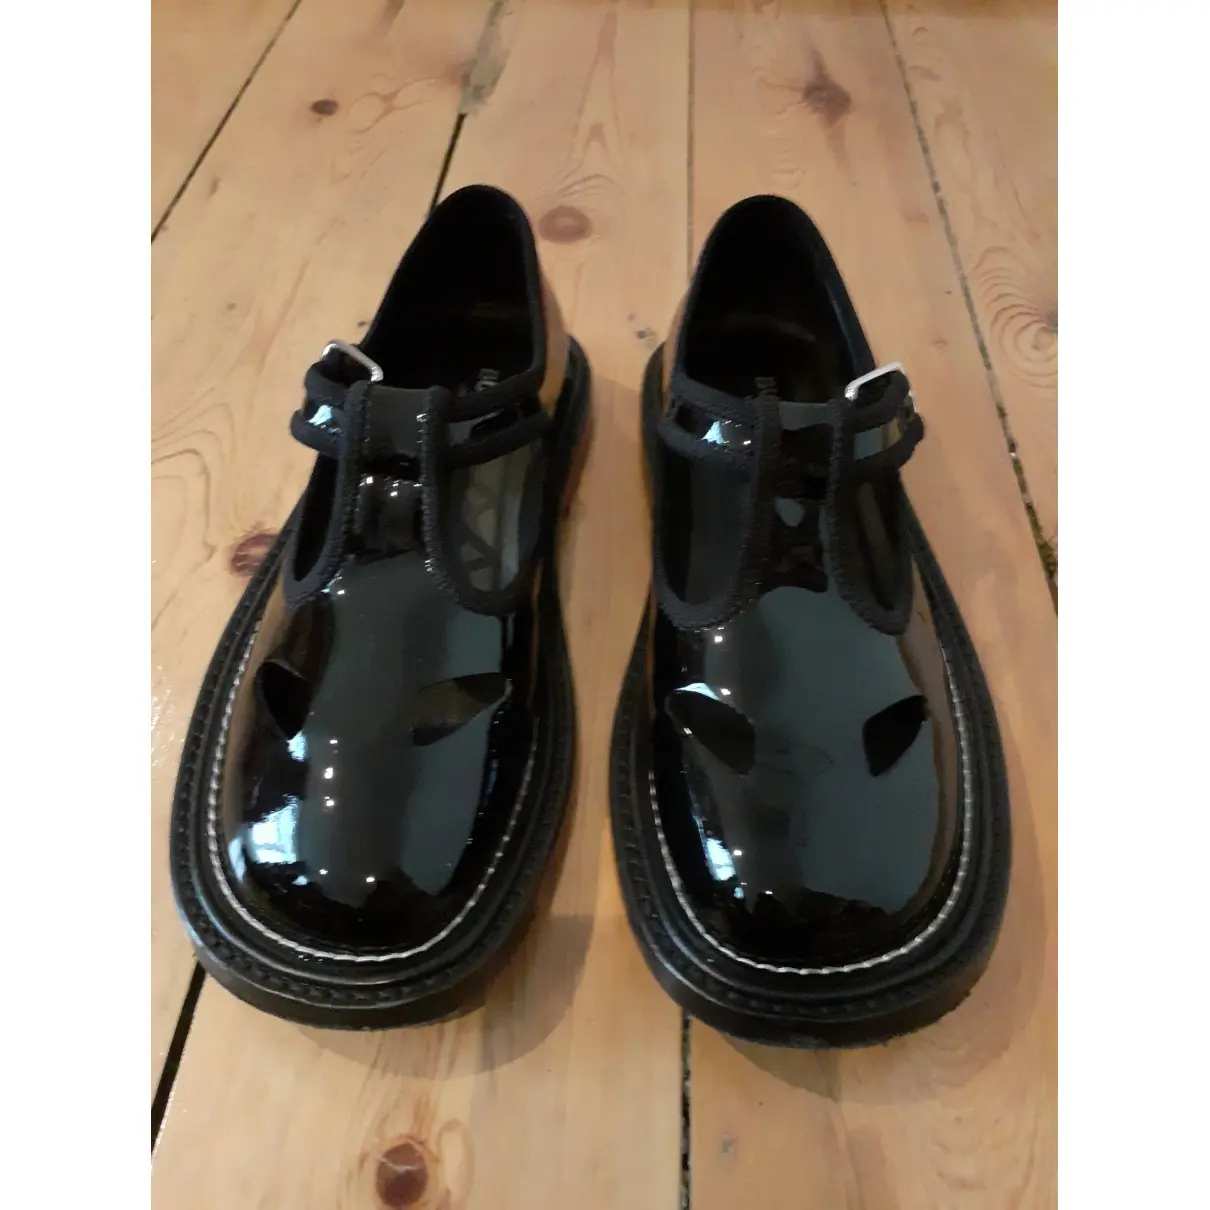 Buy Burberry Patent leather ballet flats online